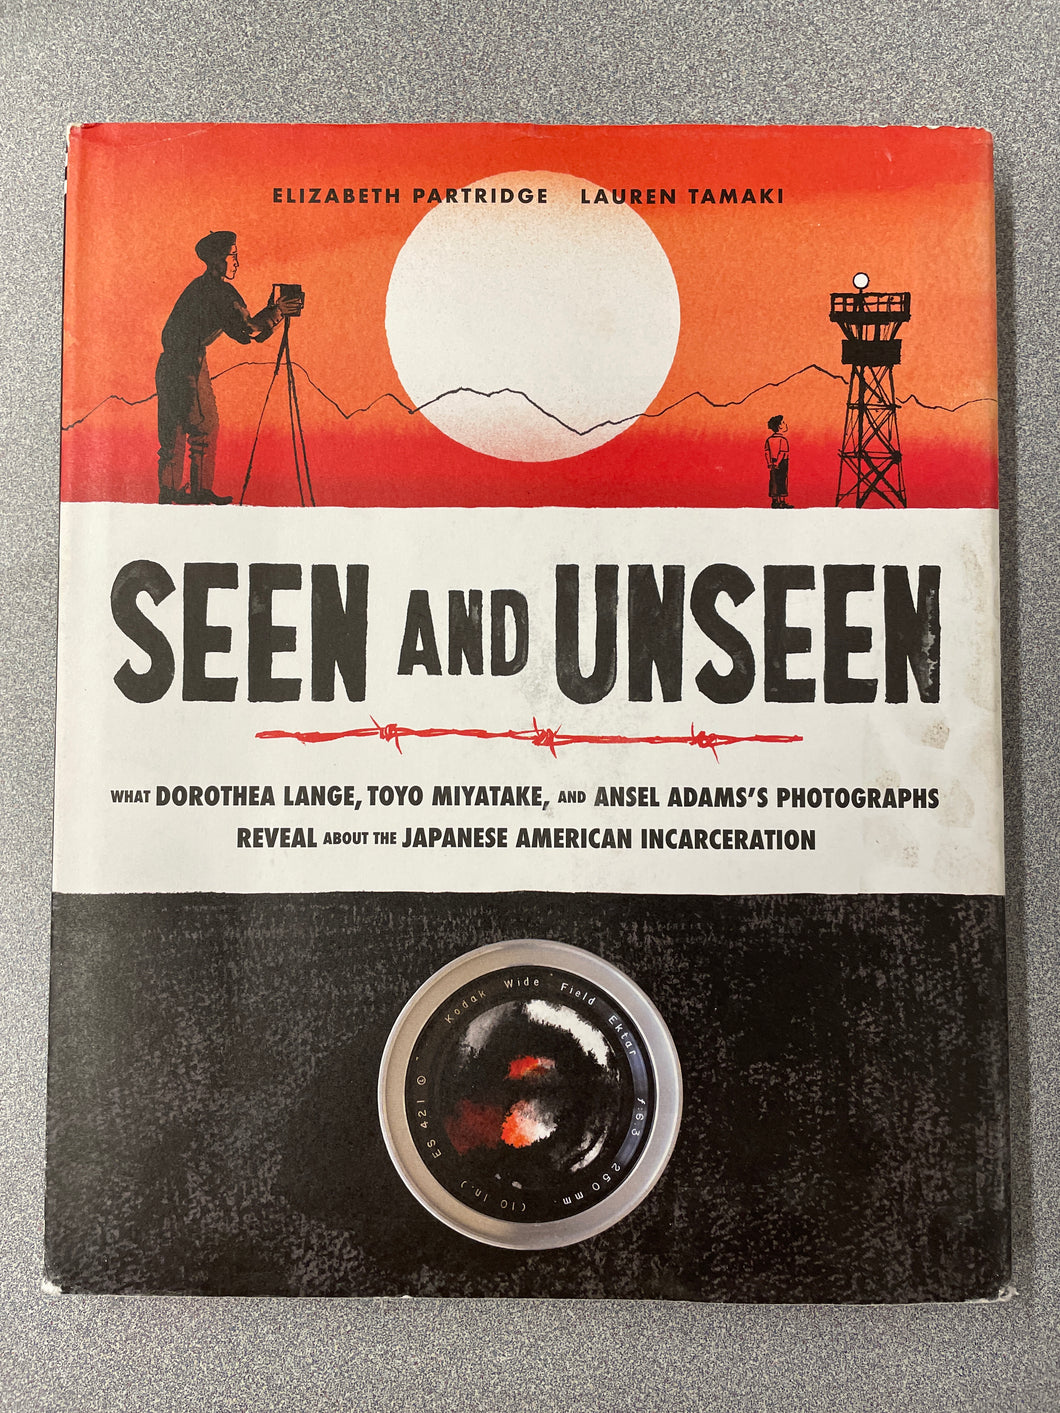 Seen and Unseen: What Dorothea Lange, Toyo Miyatake and Ansel Adams's Photographs Reveal About the Japanese American Incarceration, Partridge, Elizabeth and Lauren Yamaki [2022] CN 2/23